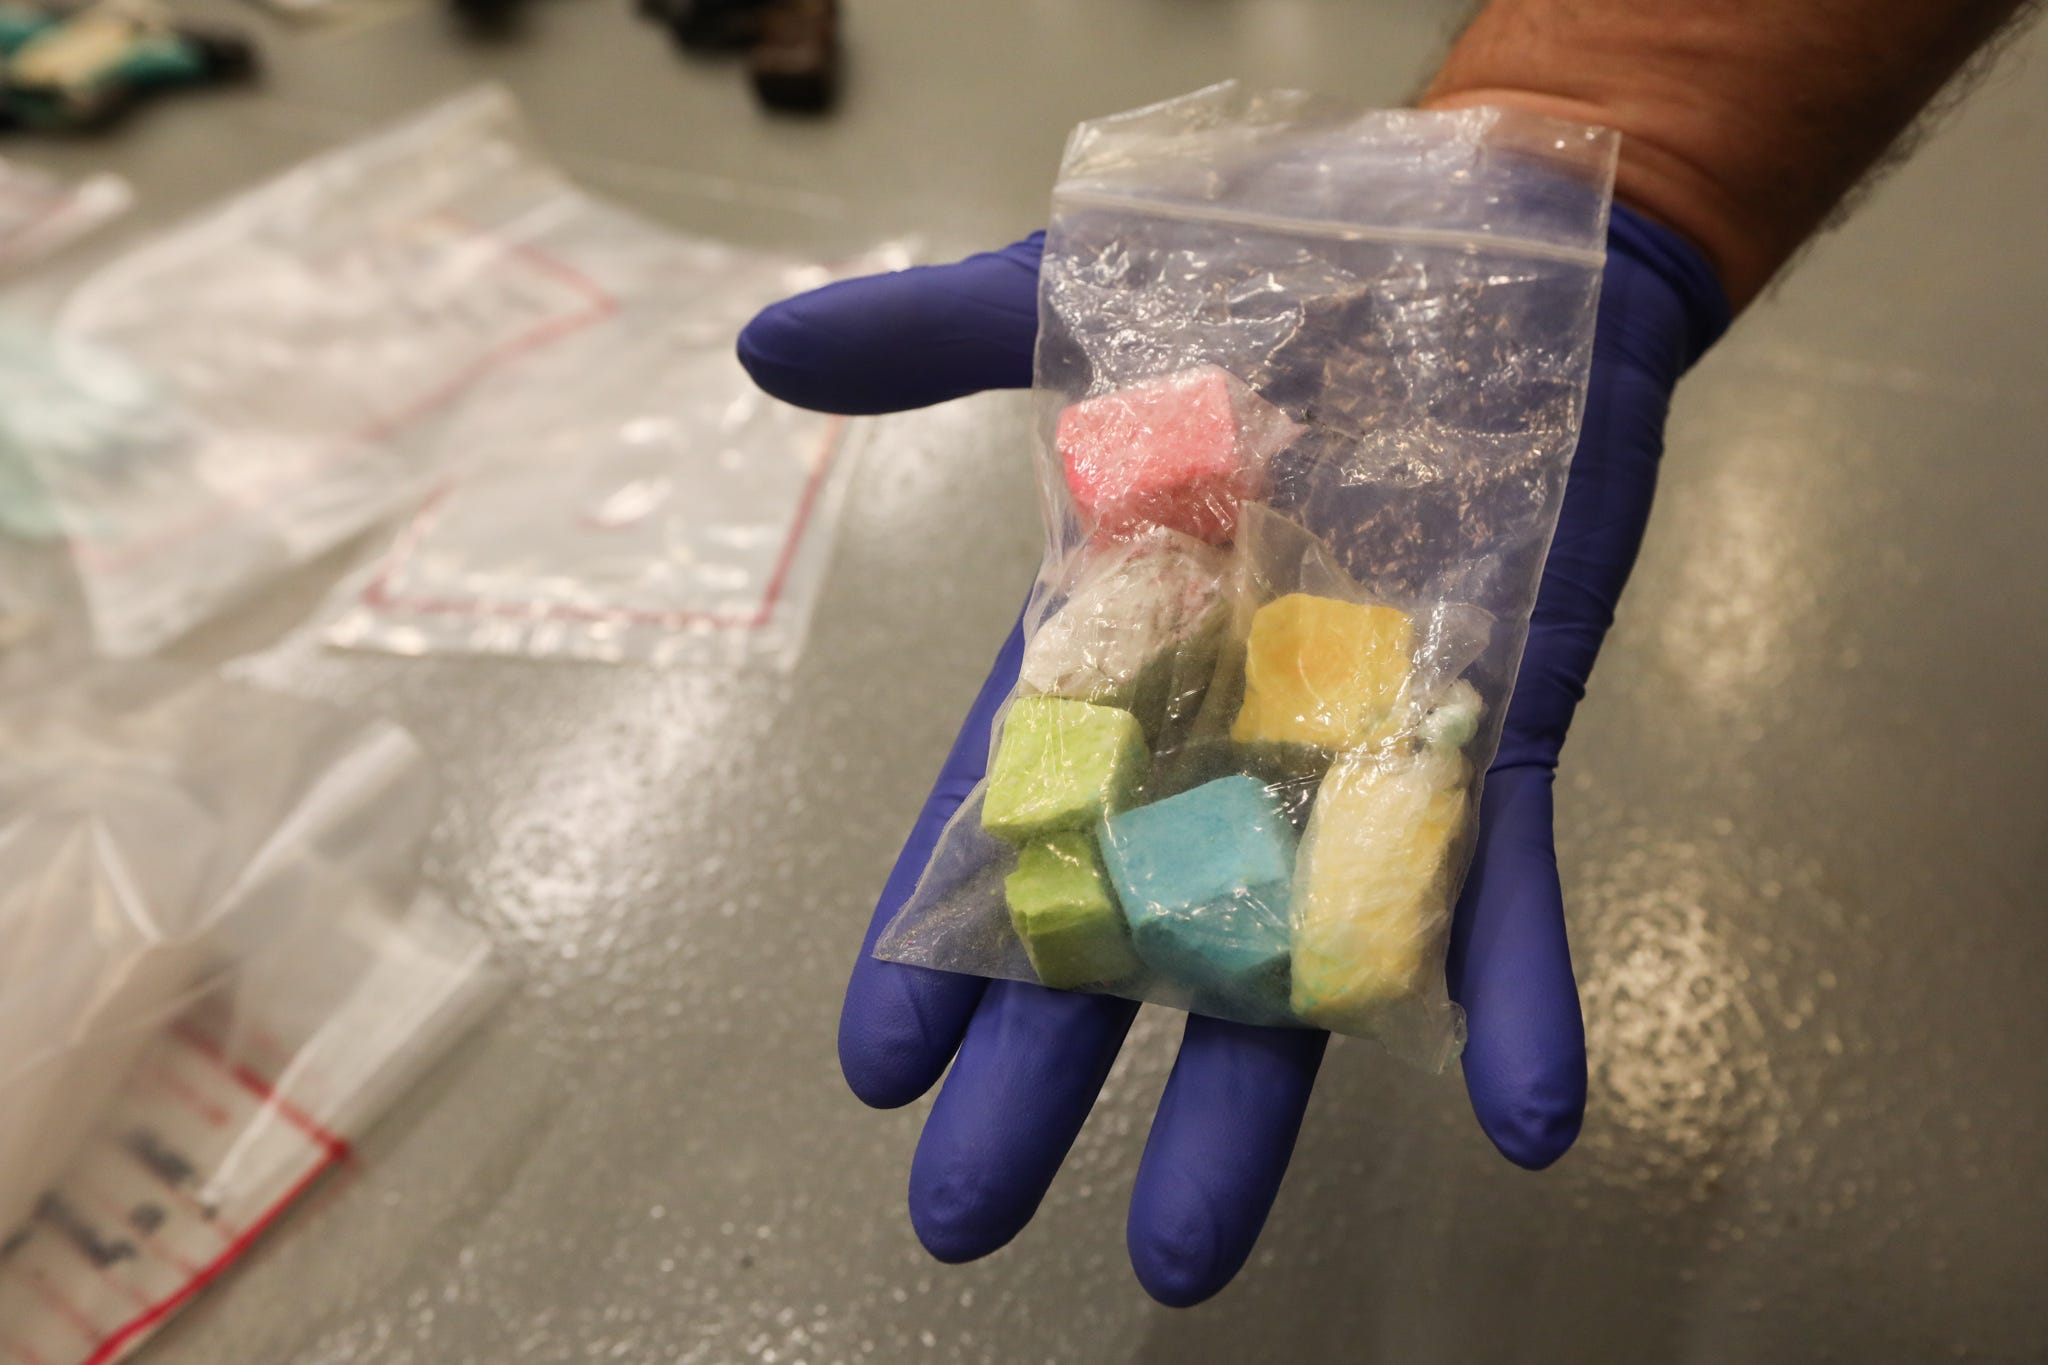 An addiction expert on how to fight Oregon's growing fentanyl crisis - OPB